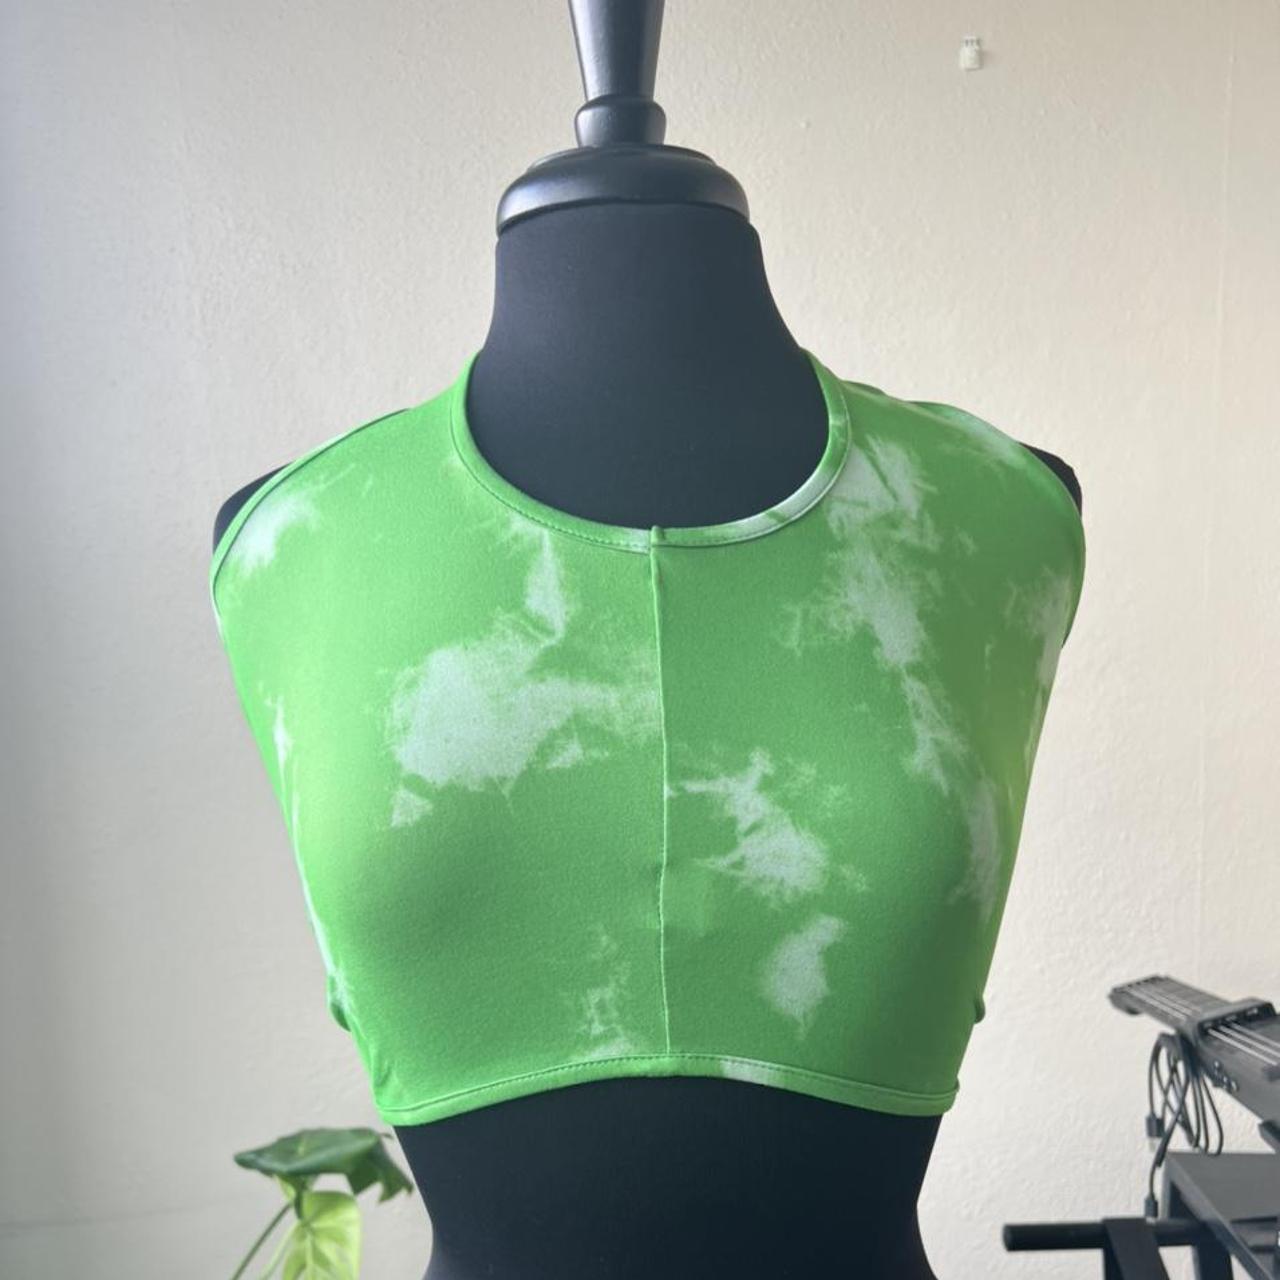 Product Image 1 - One size crop top 
See